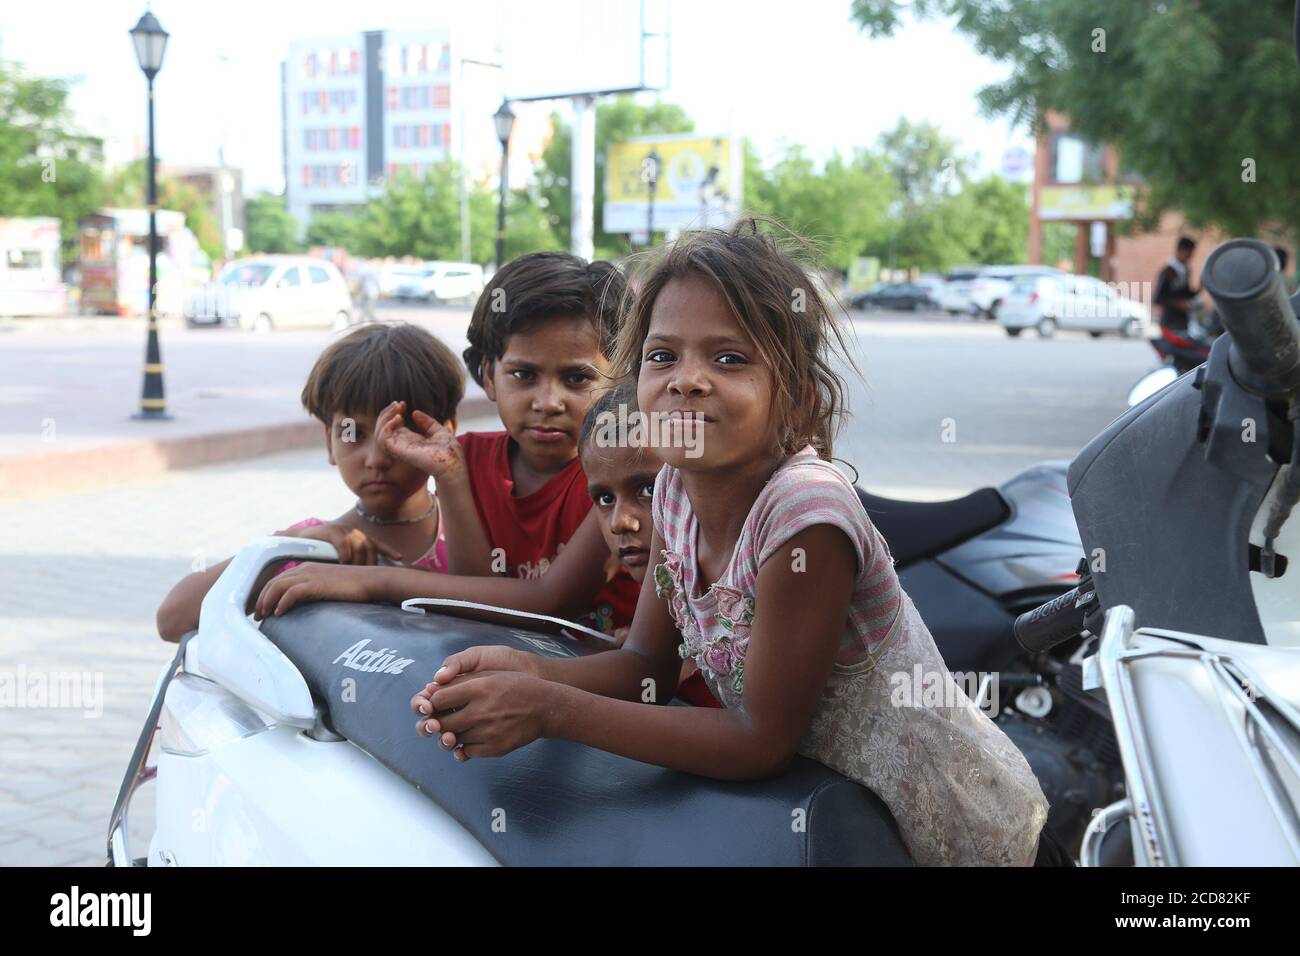 jodhpur, rajasthan, india, 20th September 2020: indian poor homeless little kids wearing dirty clothes looking at the camera, roadside background outs Stock Photo